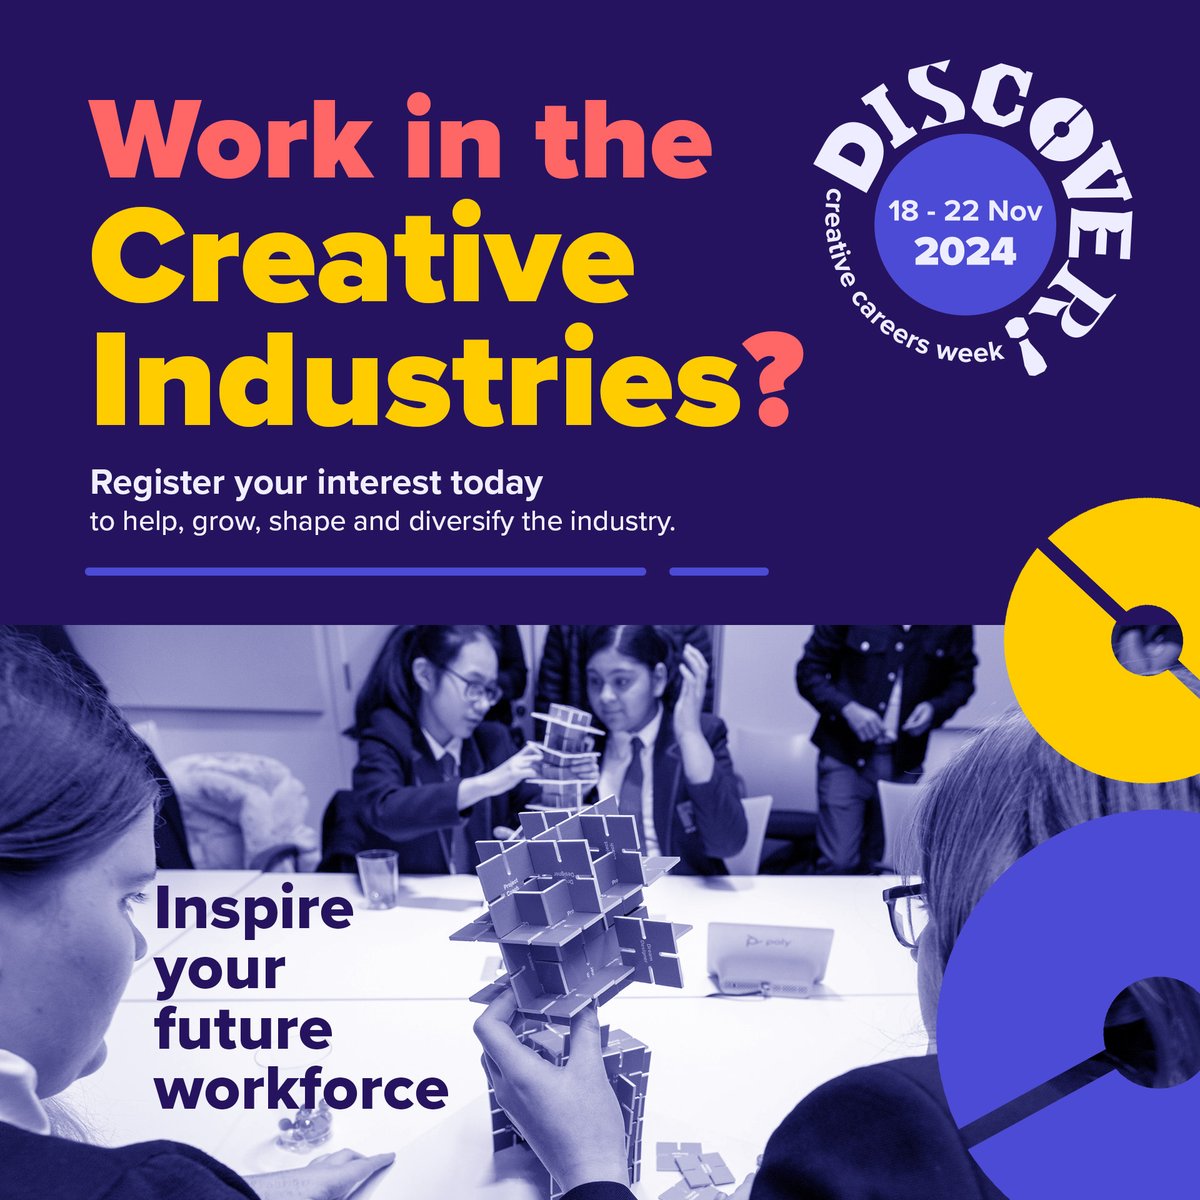 #DiscoverCreativeCareers Week is back and they want employers in the Creative Industries to get involved. You could: 🌟 Host a workshop for local students 🌟 Launch new career programmes for young people 🌟 Open your workplace for college tours Register: bit.ly/dcc_2024